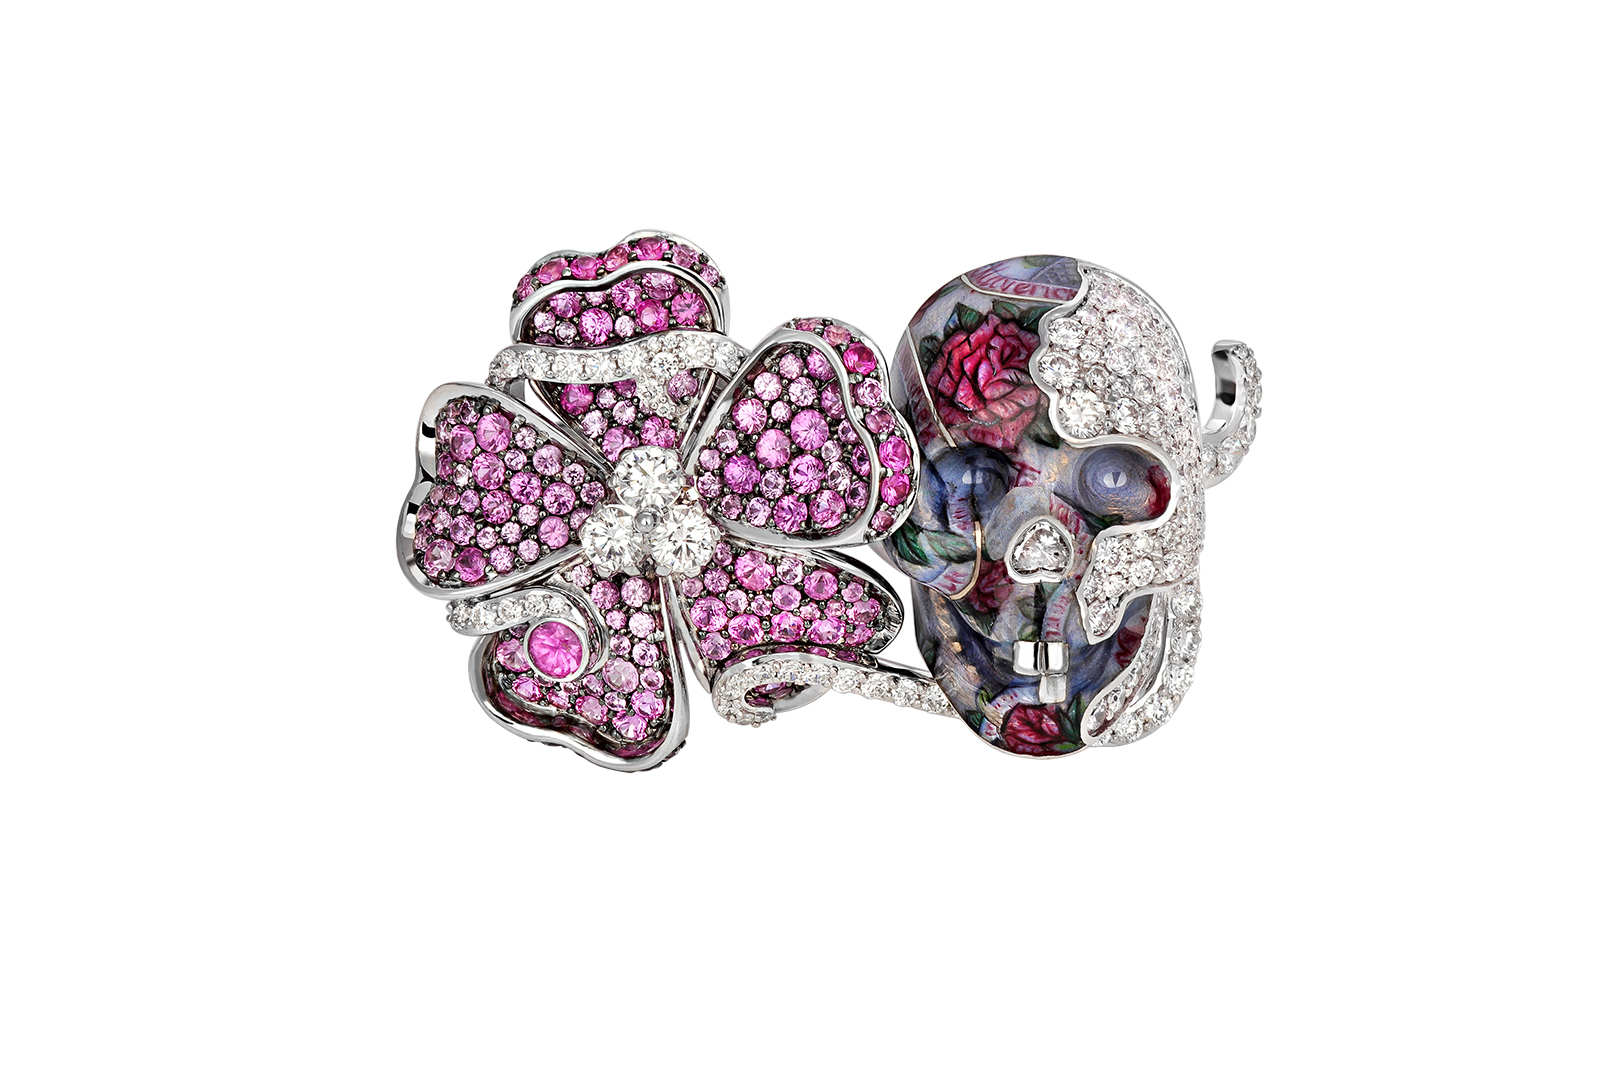 Liza Borzaya ring with diamonds, pink sapphires and enamel from "Get Inked!" collection